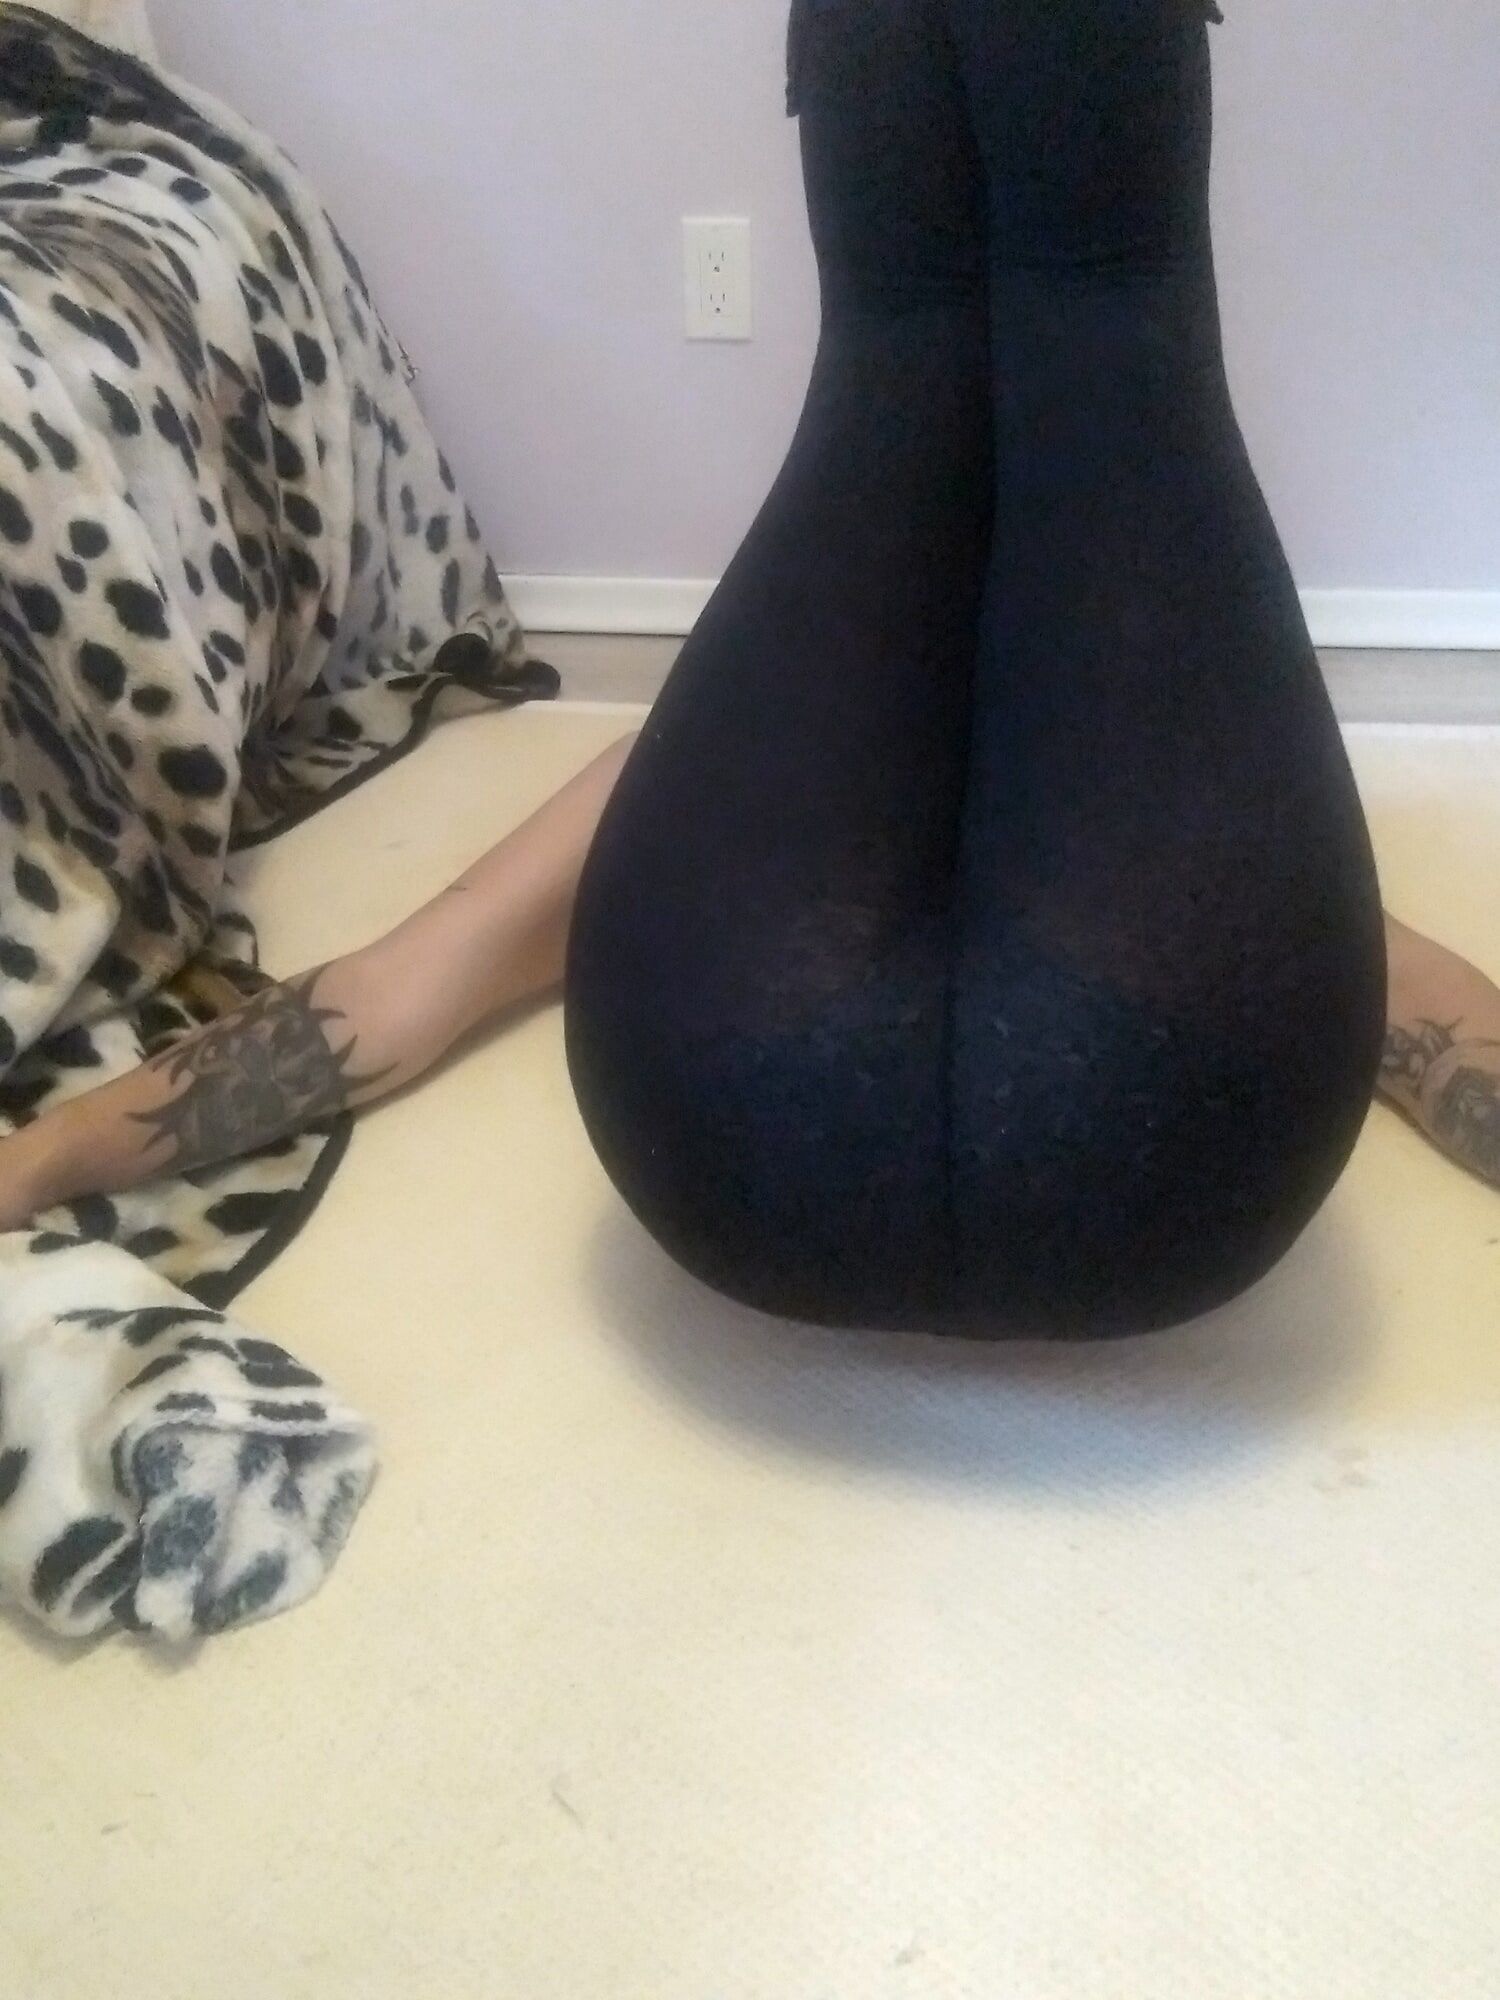 some tight leggings and a tight ass  #13